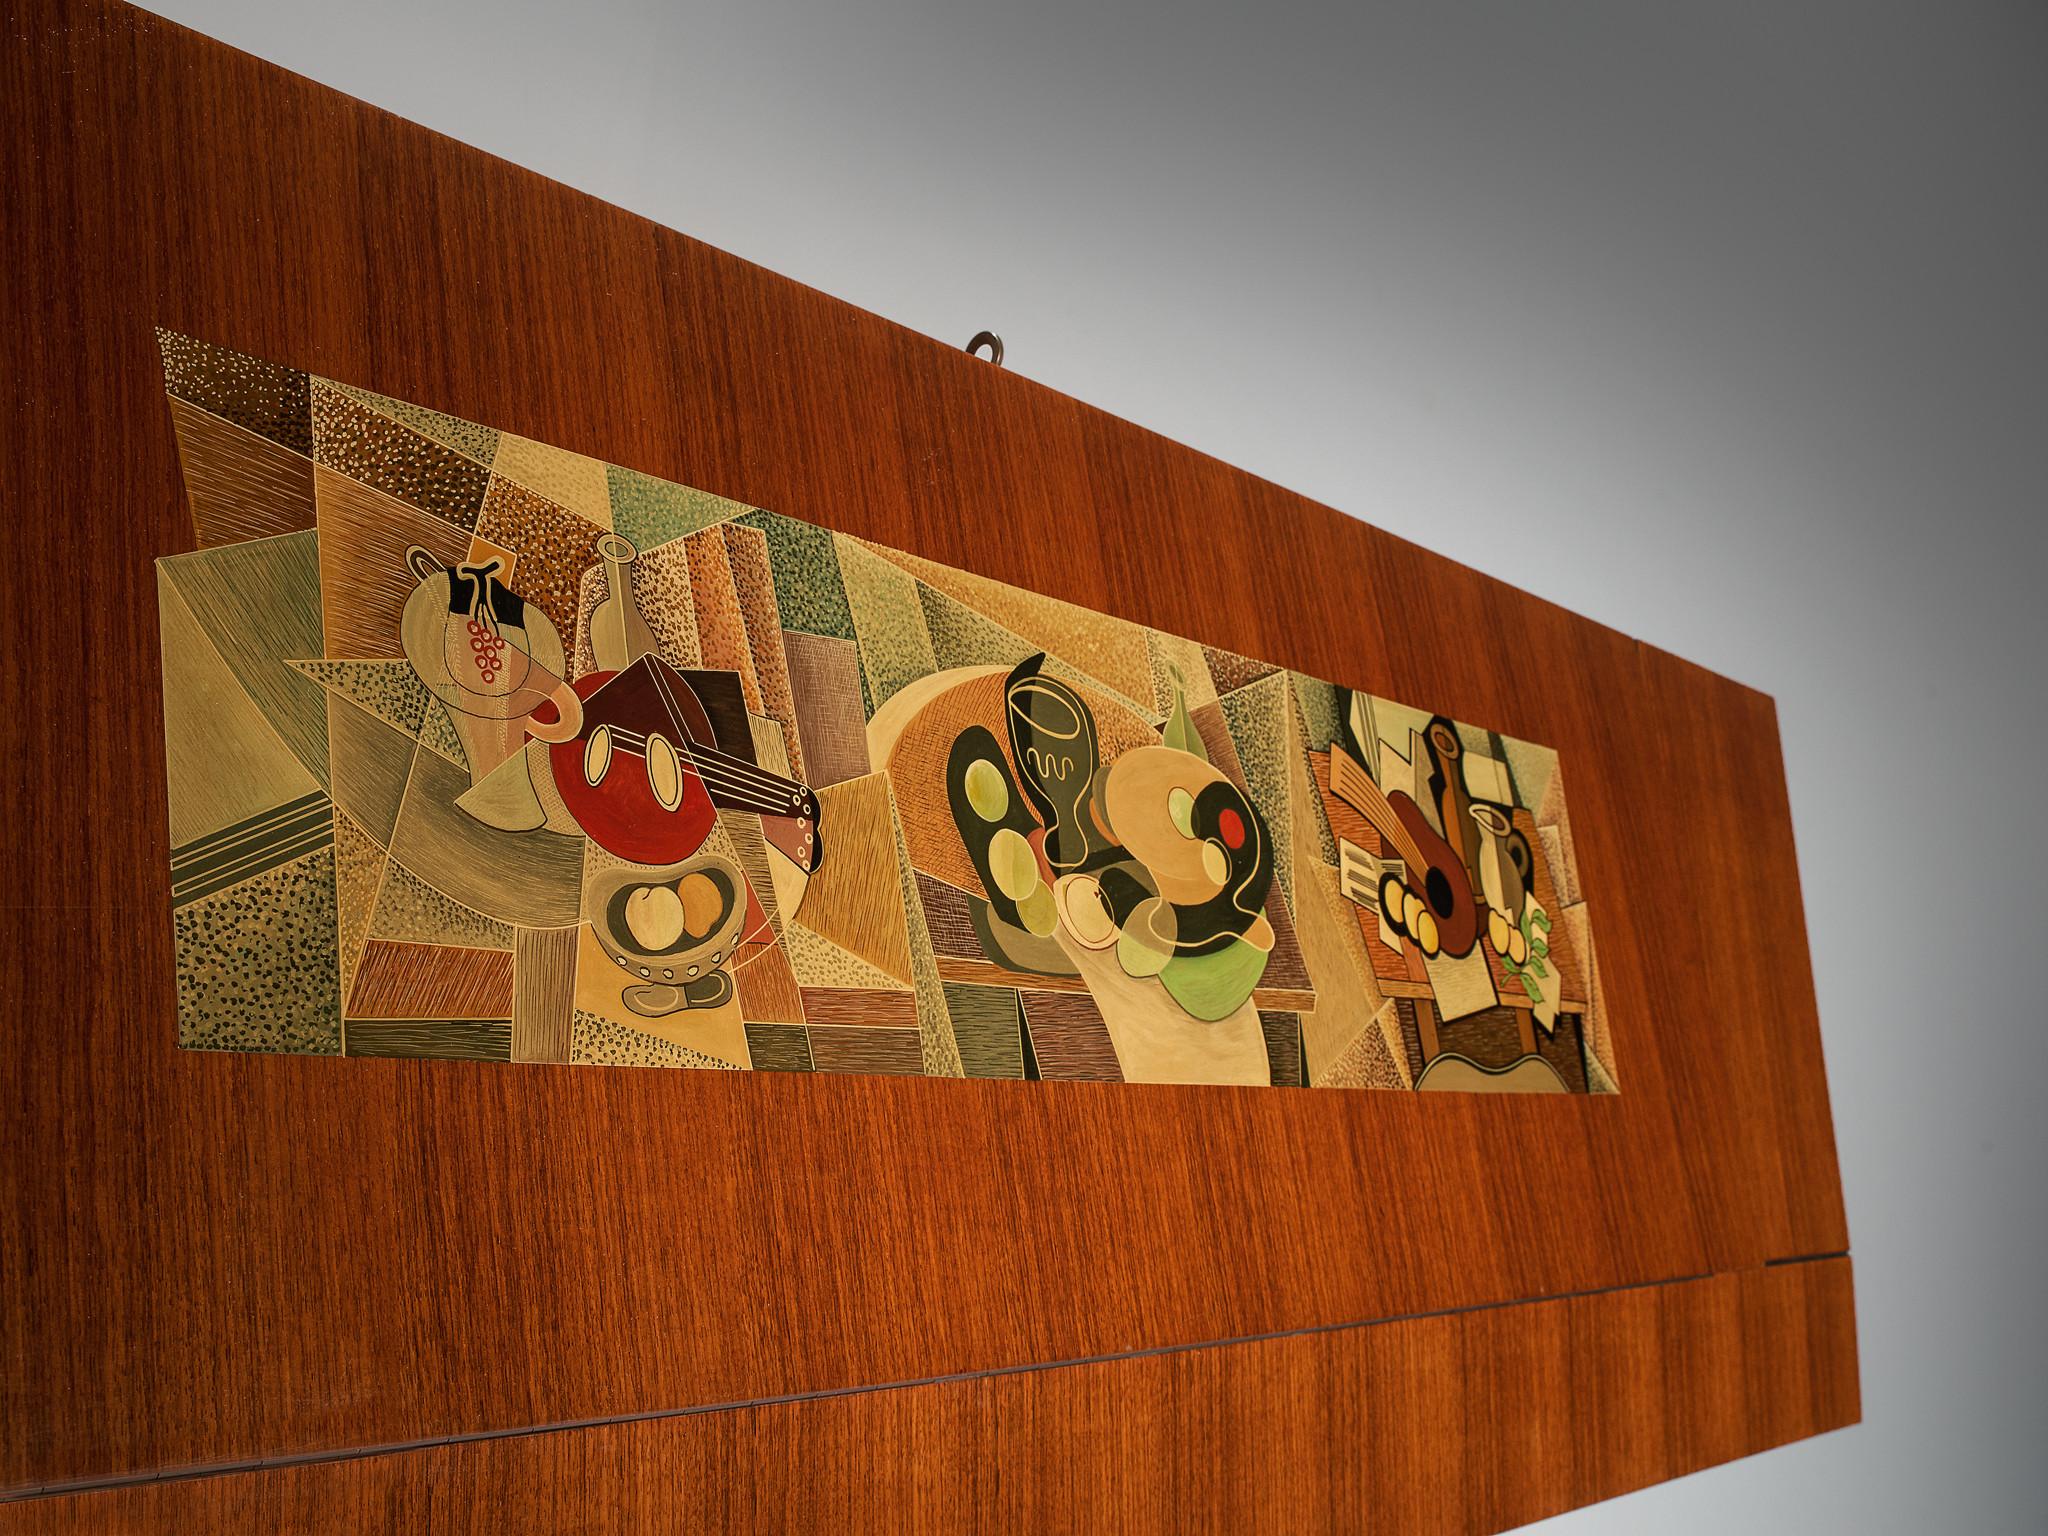 Glass Vittorio Dassi Illuminated Dry Bar Cabinet with Cubism Painting